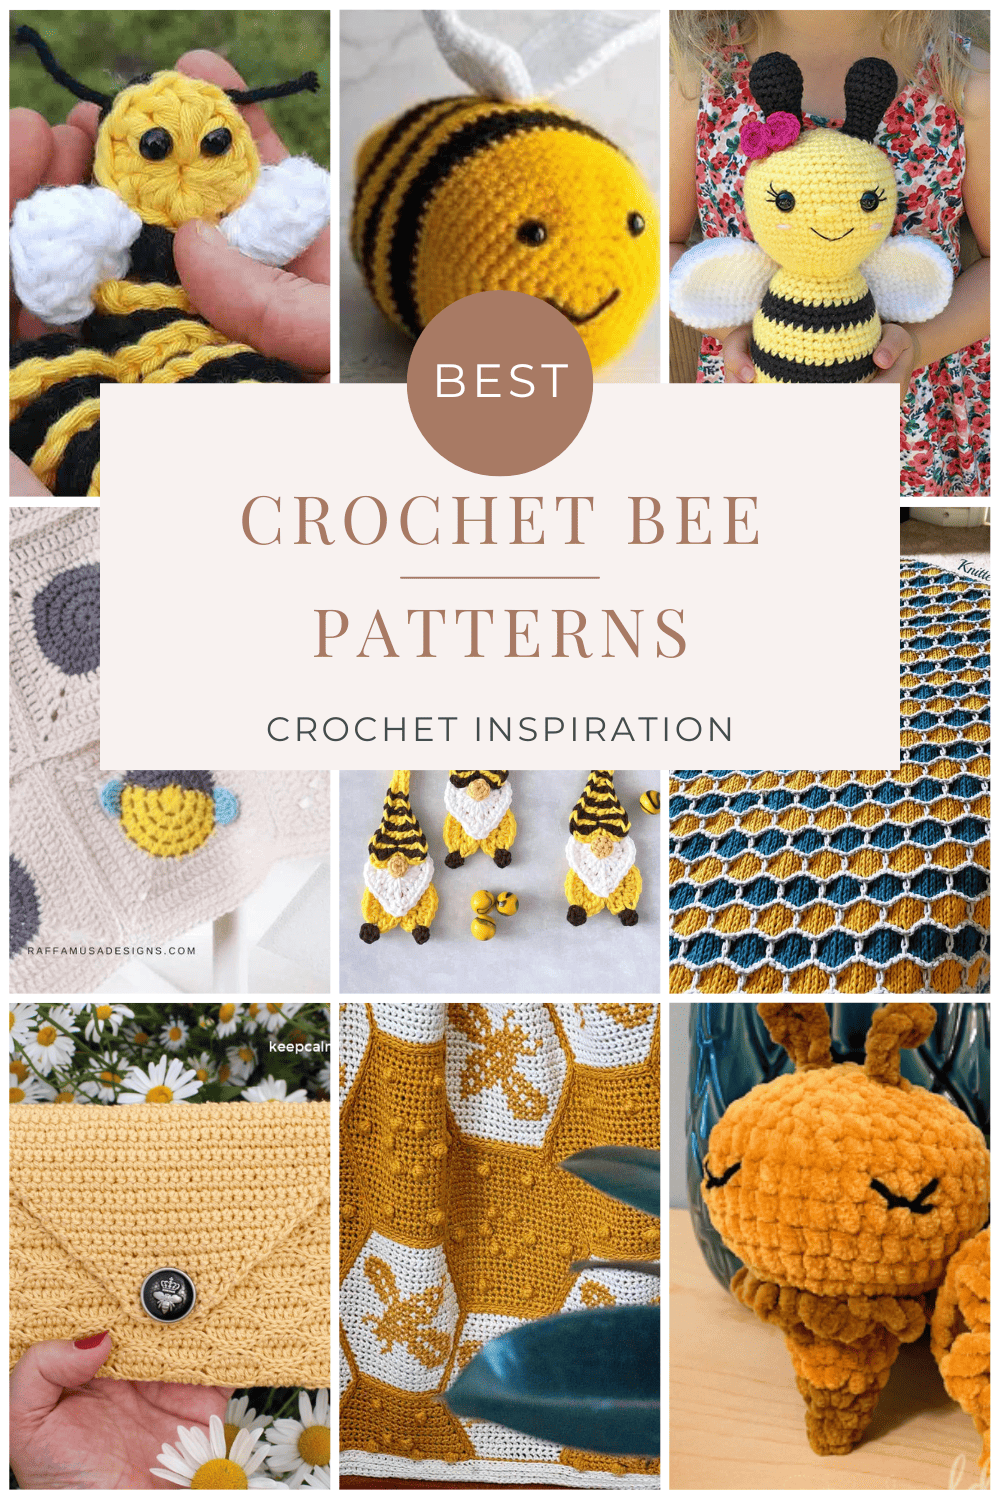 The 30 Best Crochet Bee and Hexagon Inspired Patterns